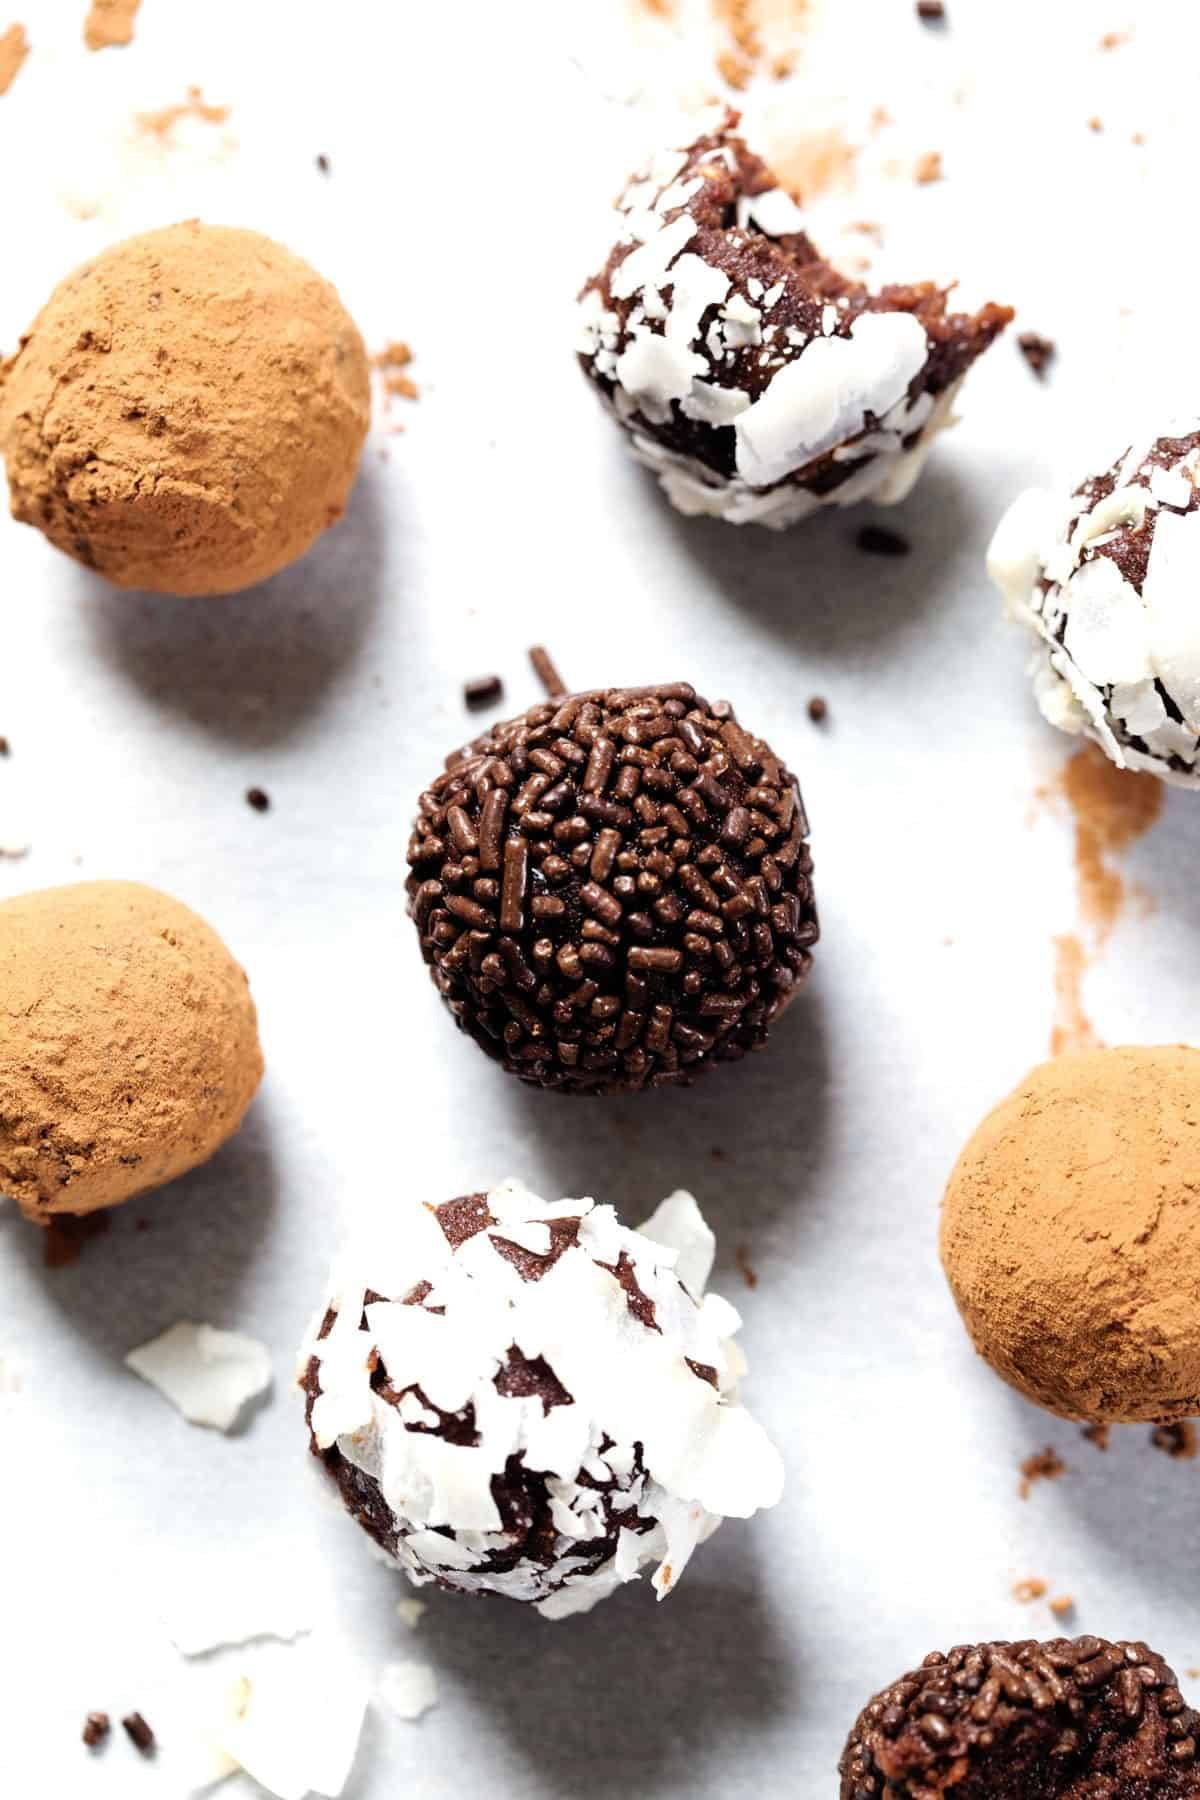 Chocolate Truffles with various toppings.